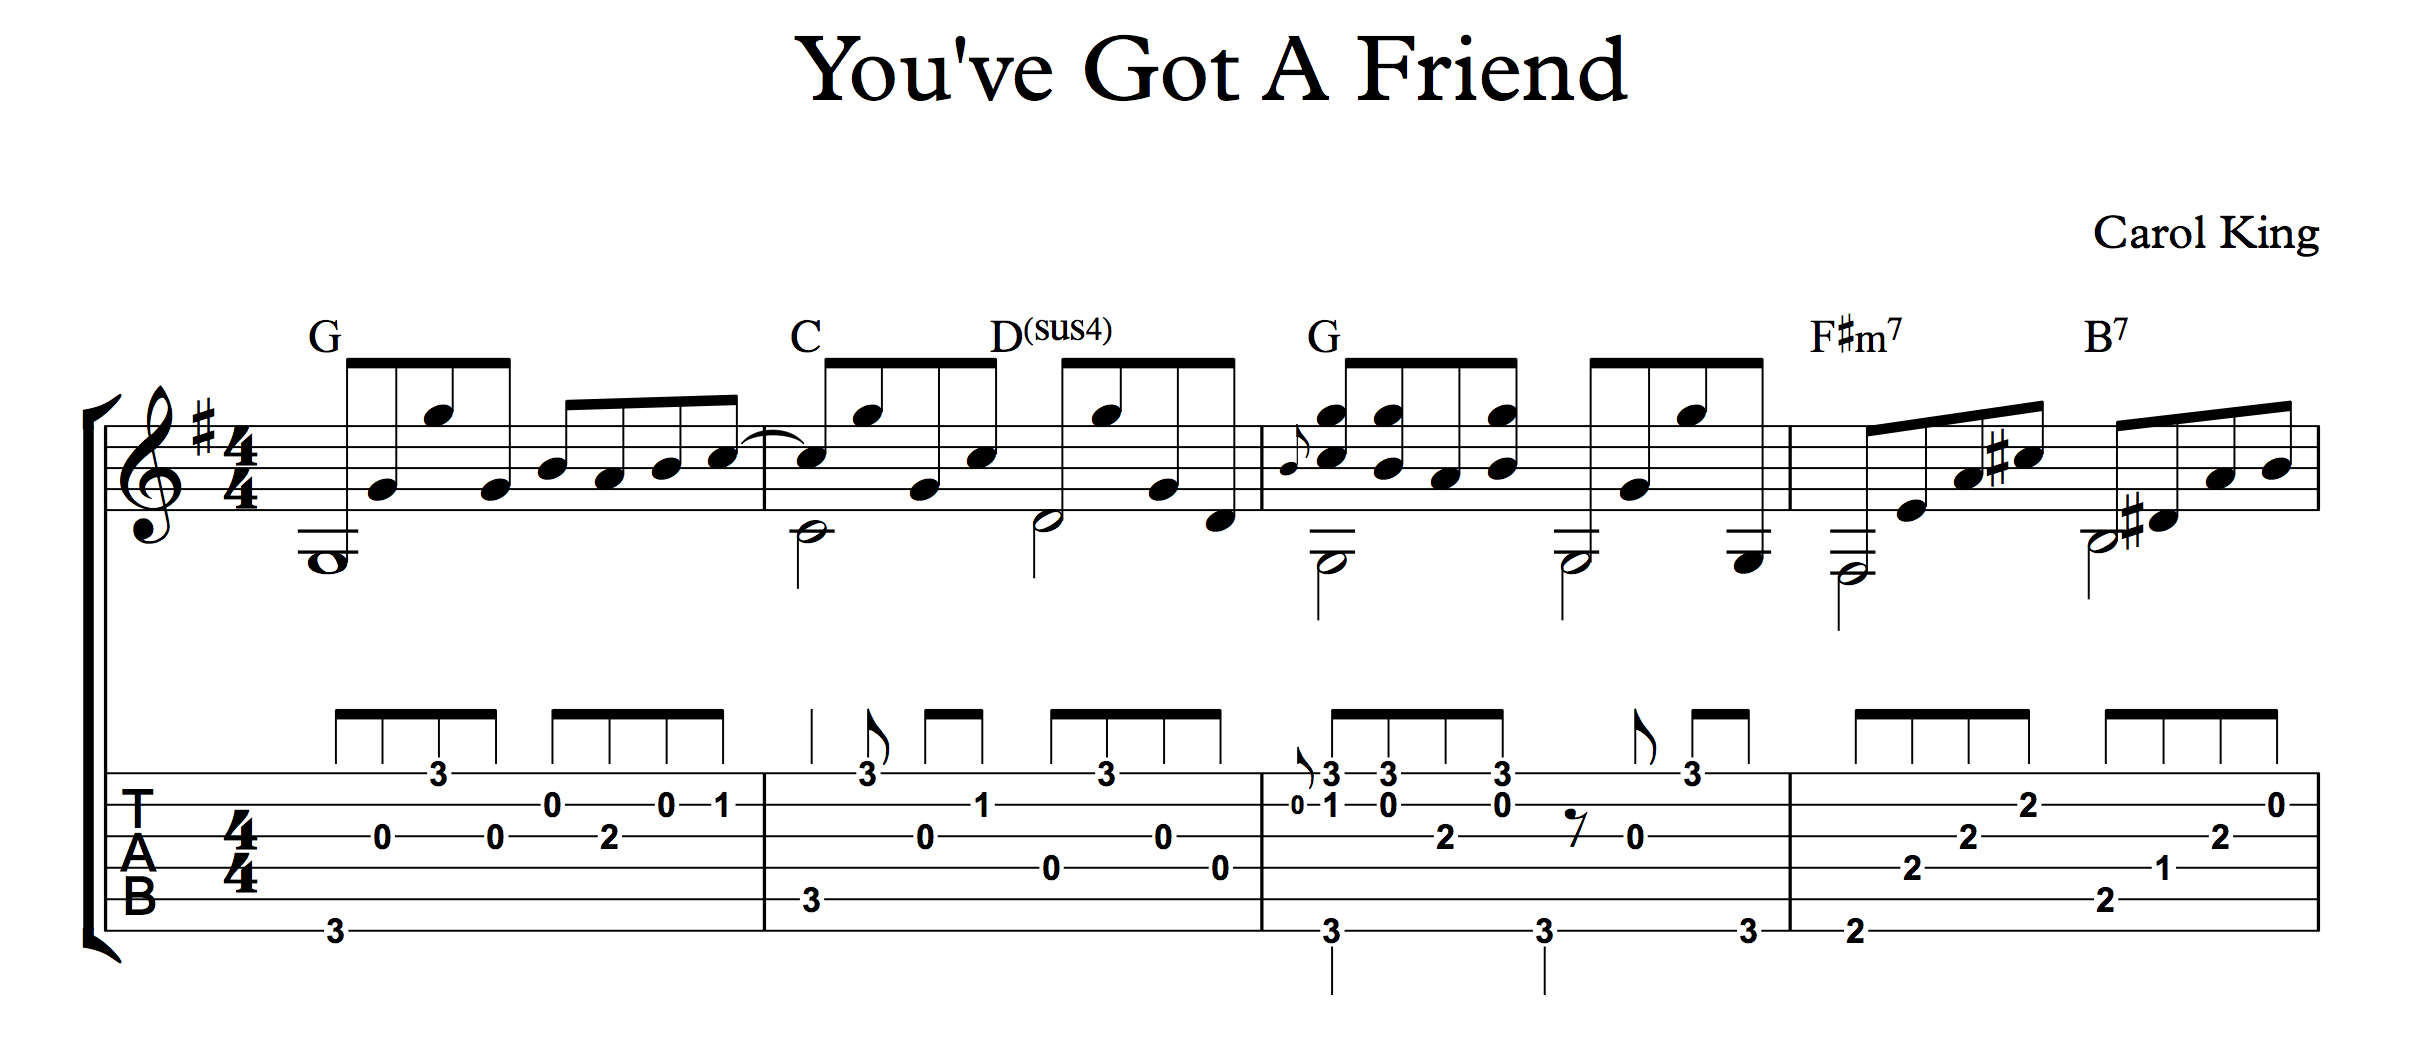 You've Got A Friend for fingerstyle guitar